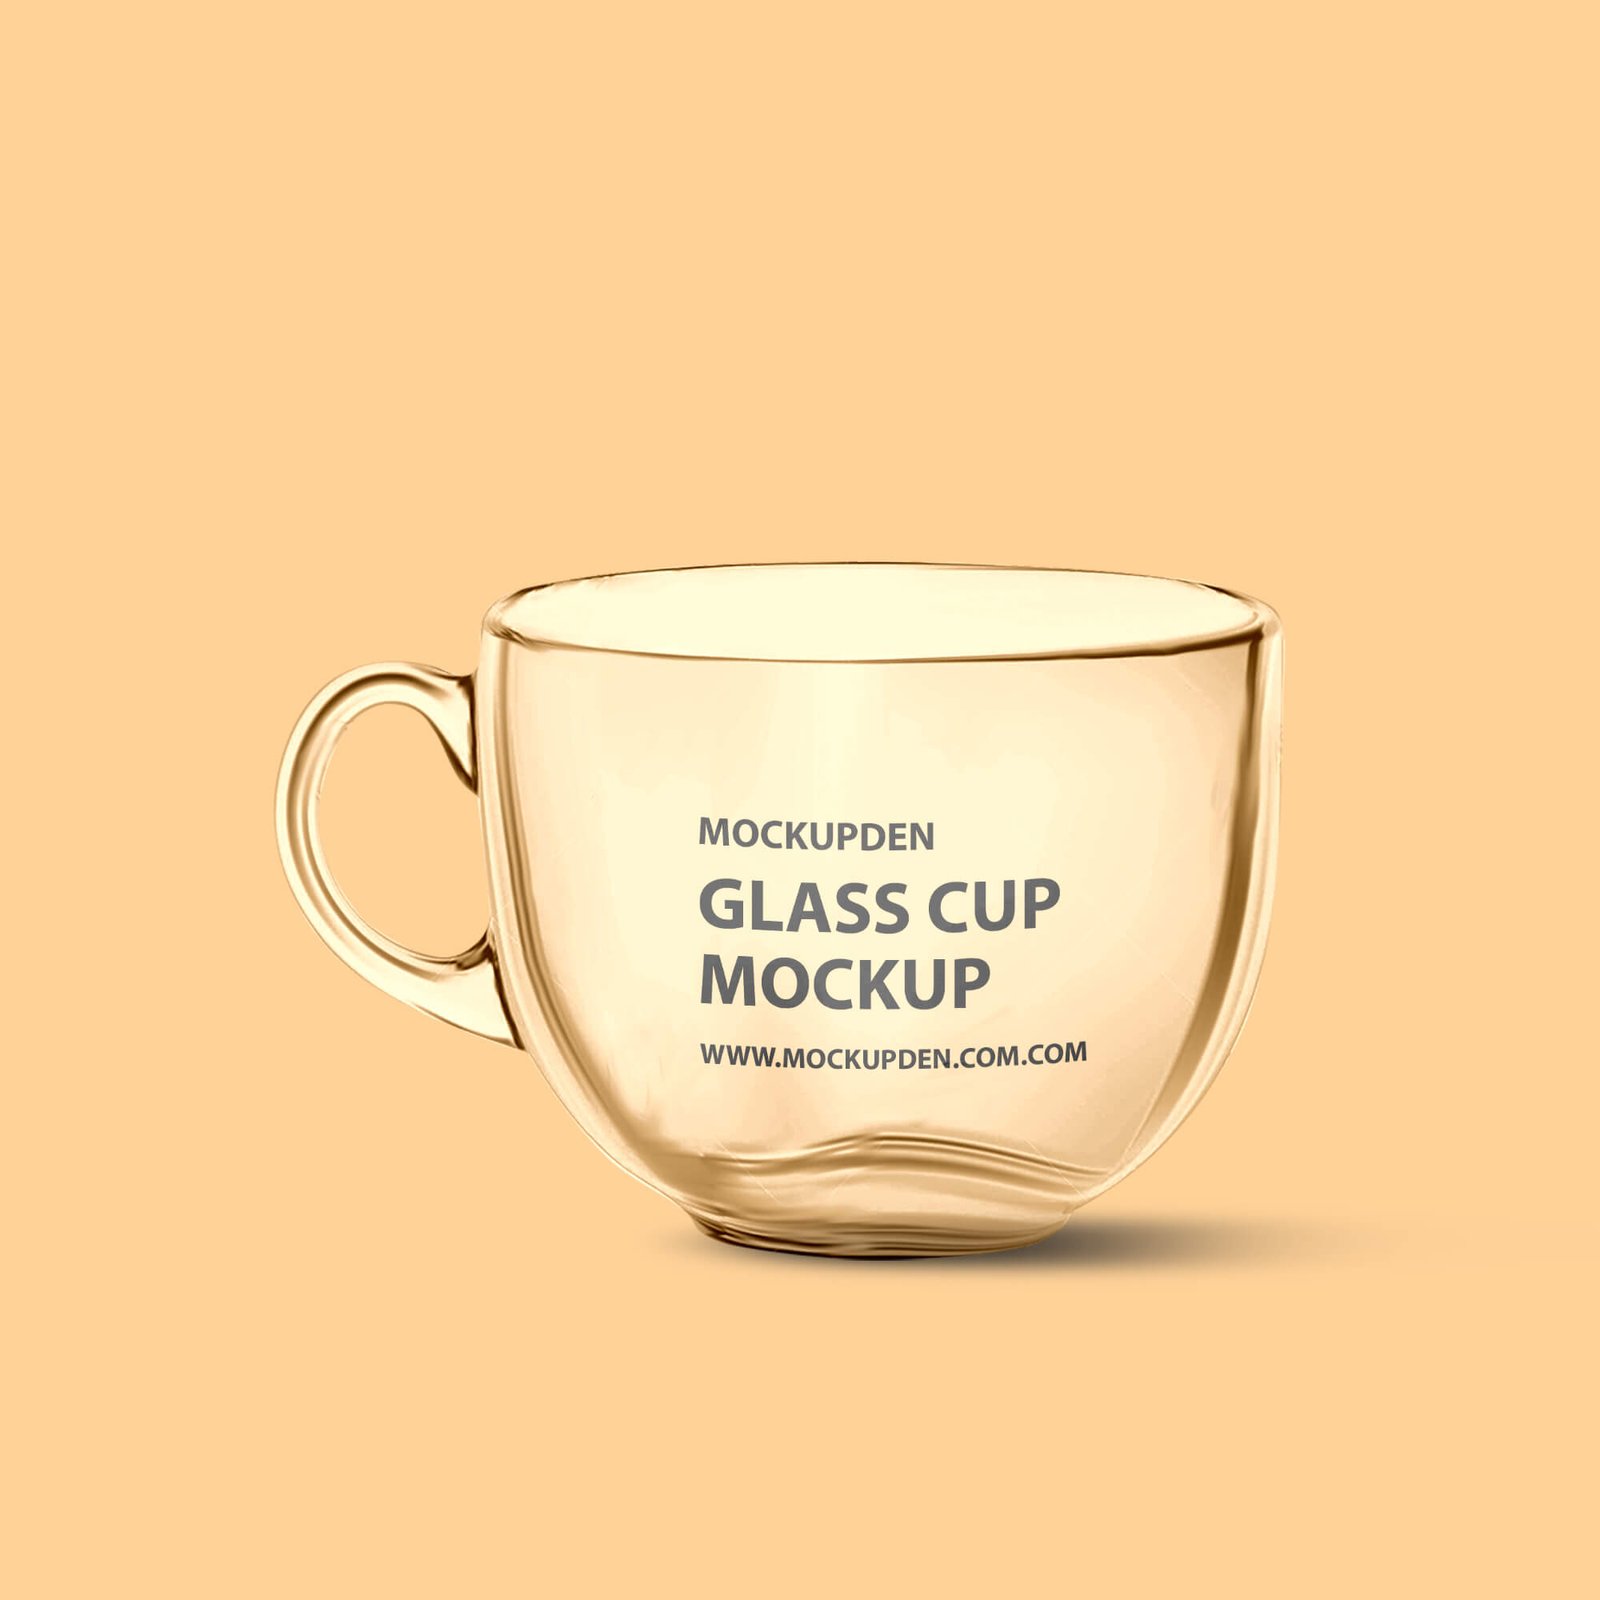 Design Free Glass Cup Mockup PSD Template